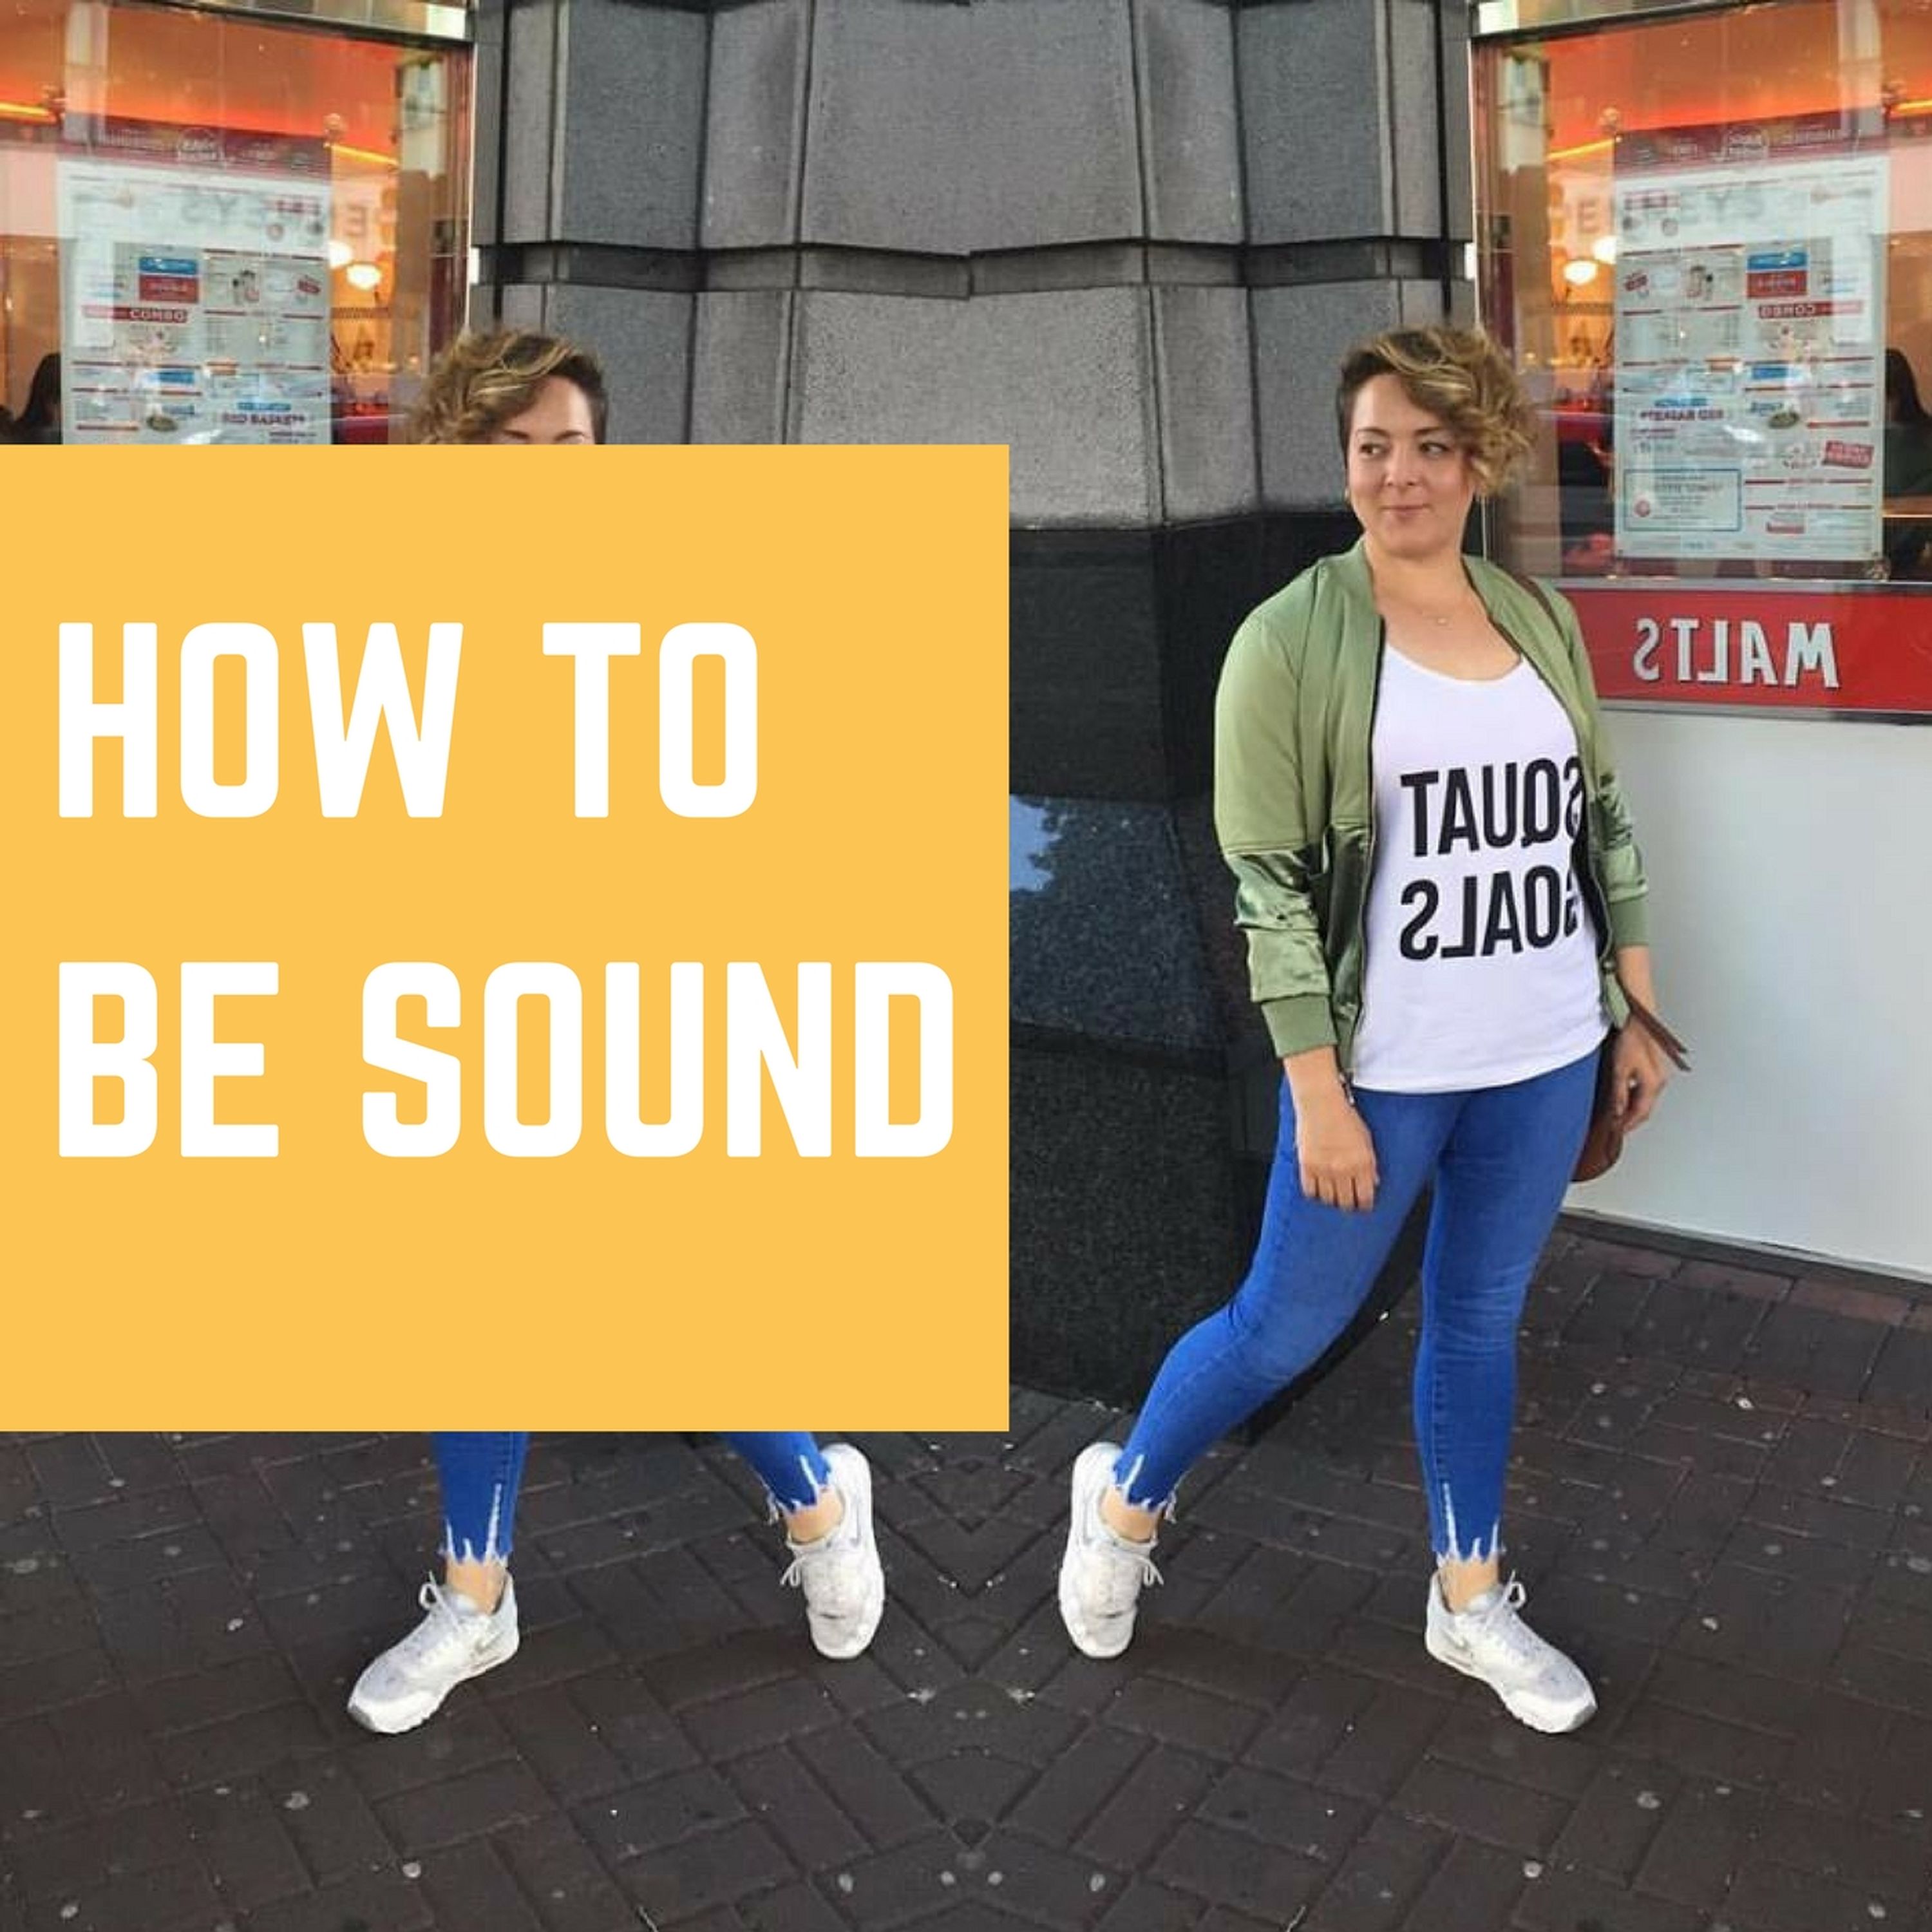 Shauna Fitzgerald on how to be sound